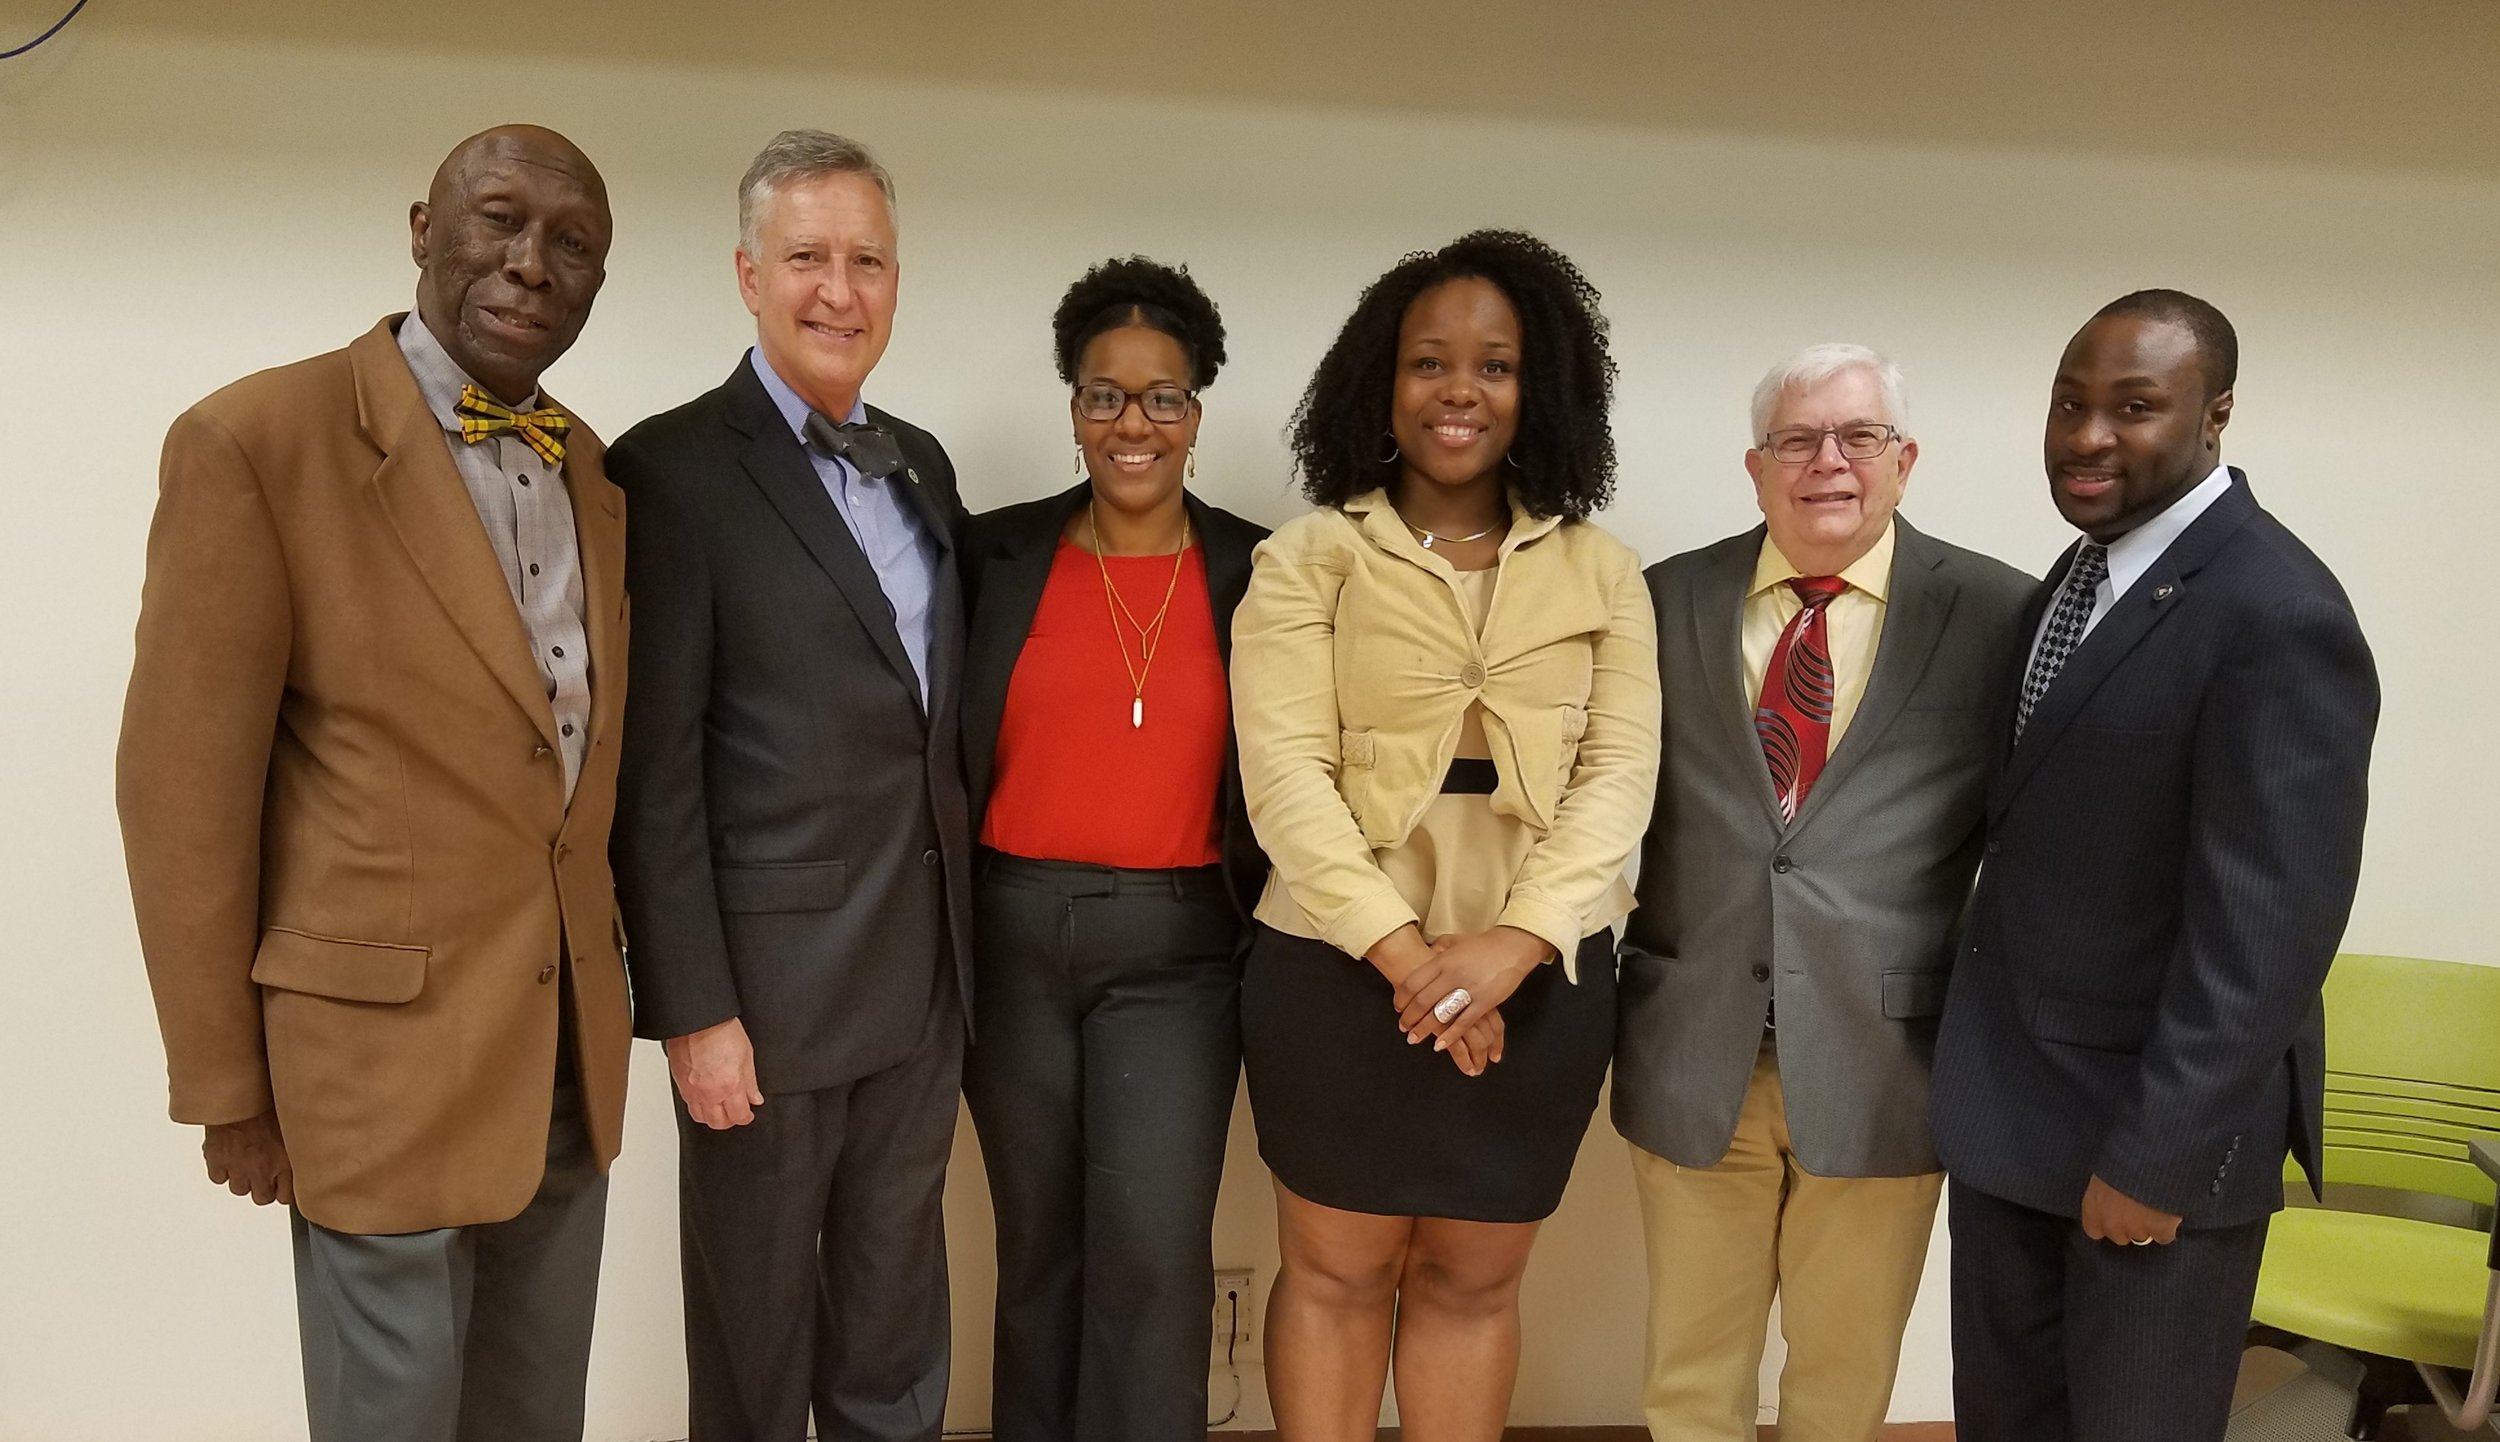  Brooklyn Chapter Leaders. From left to right: Franklyn Hayes, Anthony Edward Major, Diomaris Martinez, Joann Winter, Ron Semaria, and Adrian Duncan 